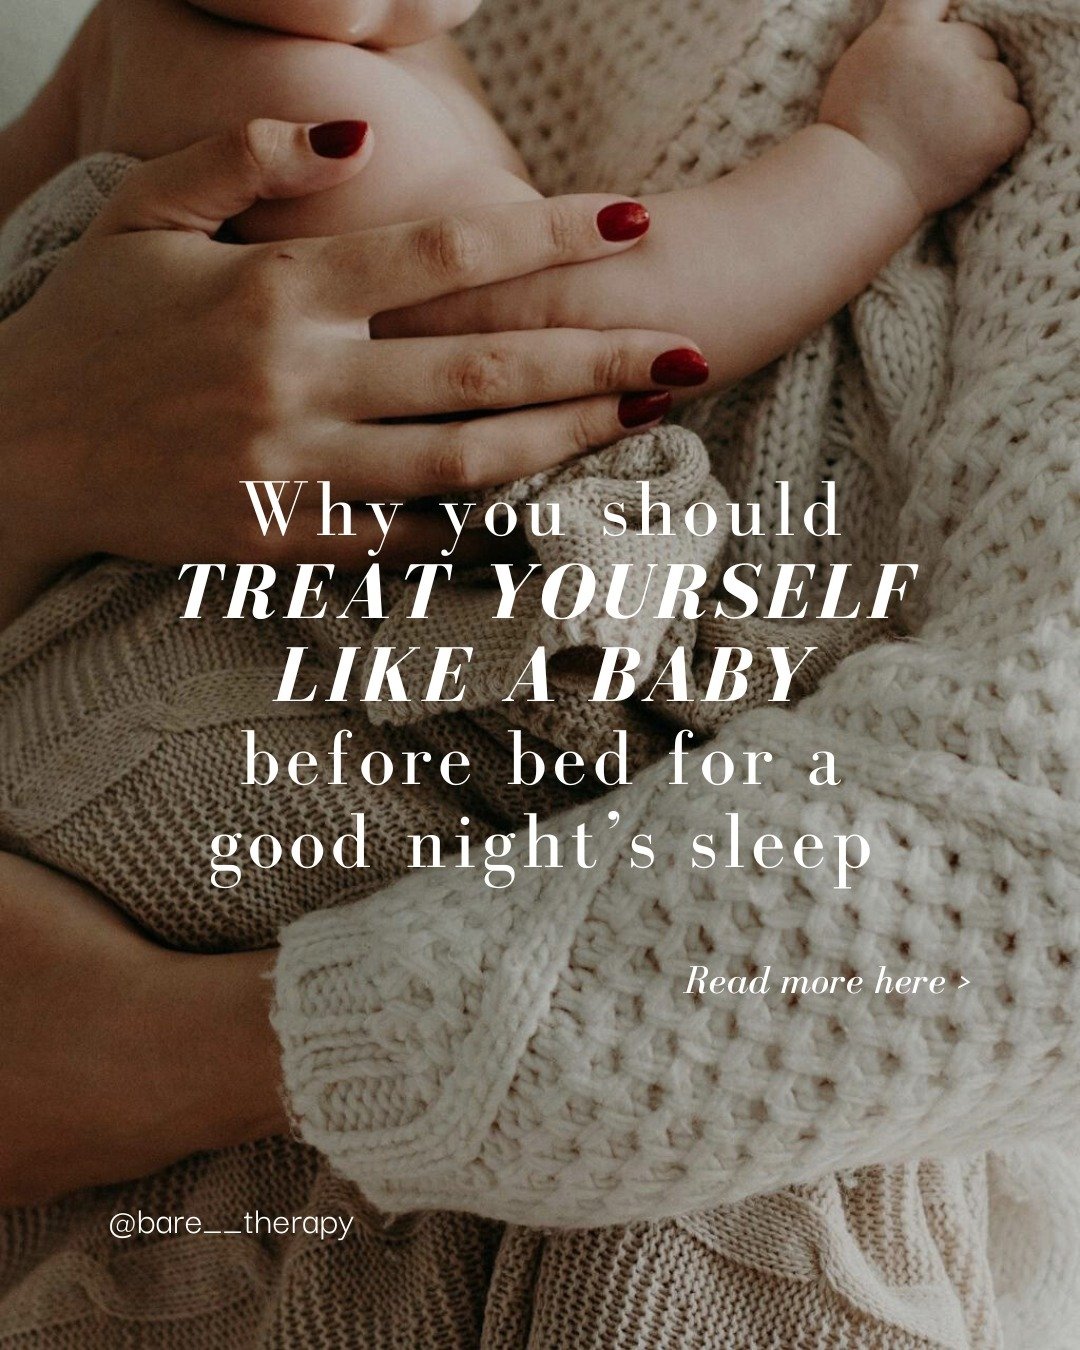 This post is as much a reminder for me as it is for you... 🕊

A medical doctor once told me that we should treat ourselves like babies in the evening, in order to get the best from our sleep. I can't stop thinking about his simple tips - especially 